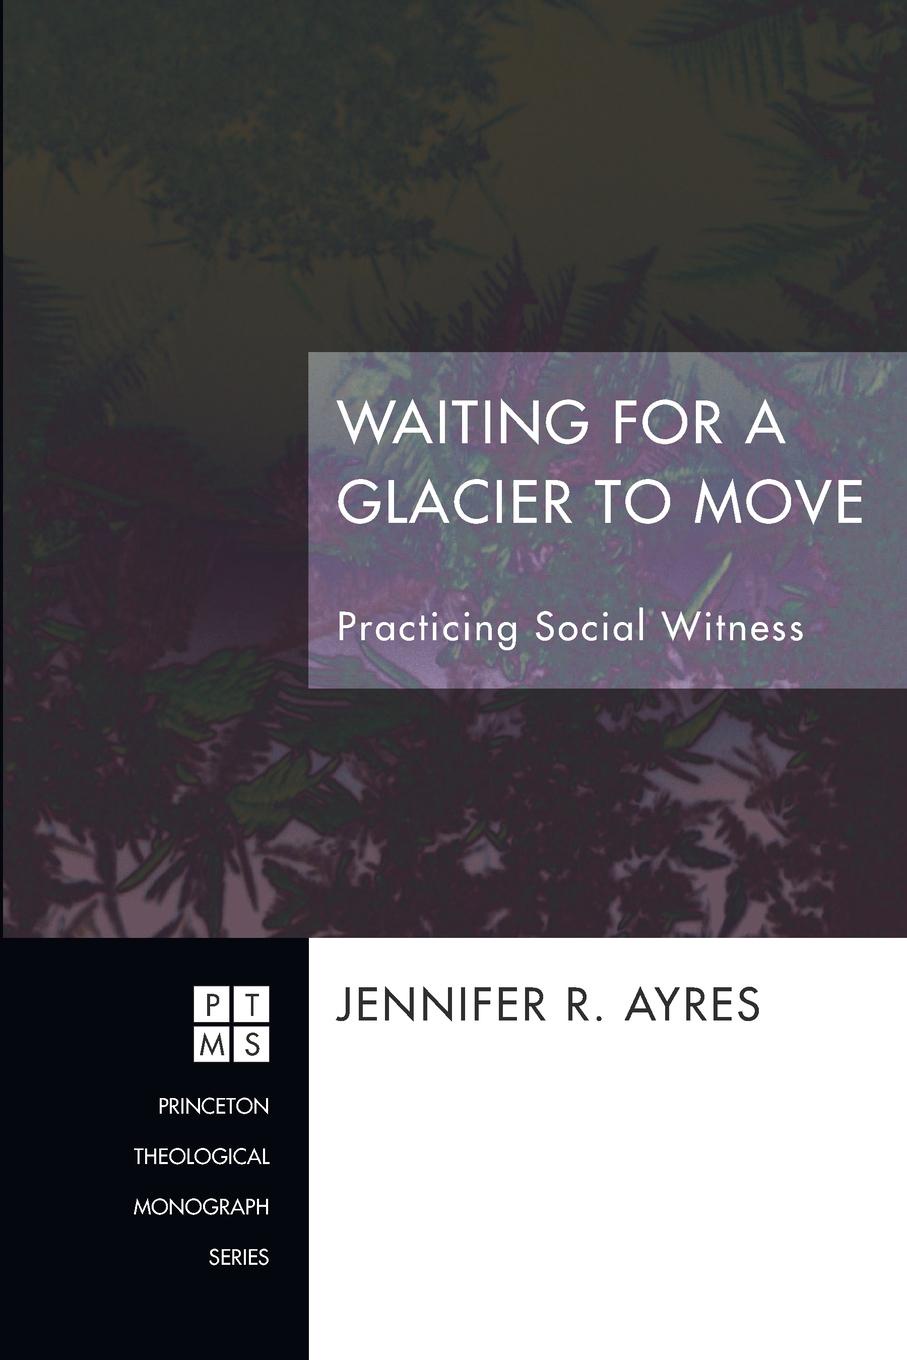 Waiting for a Glacier to Move. Practicing Social Witness